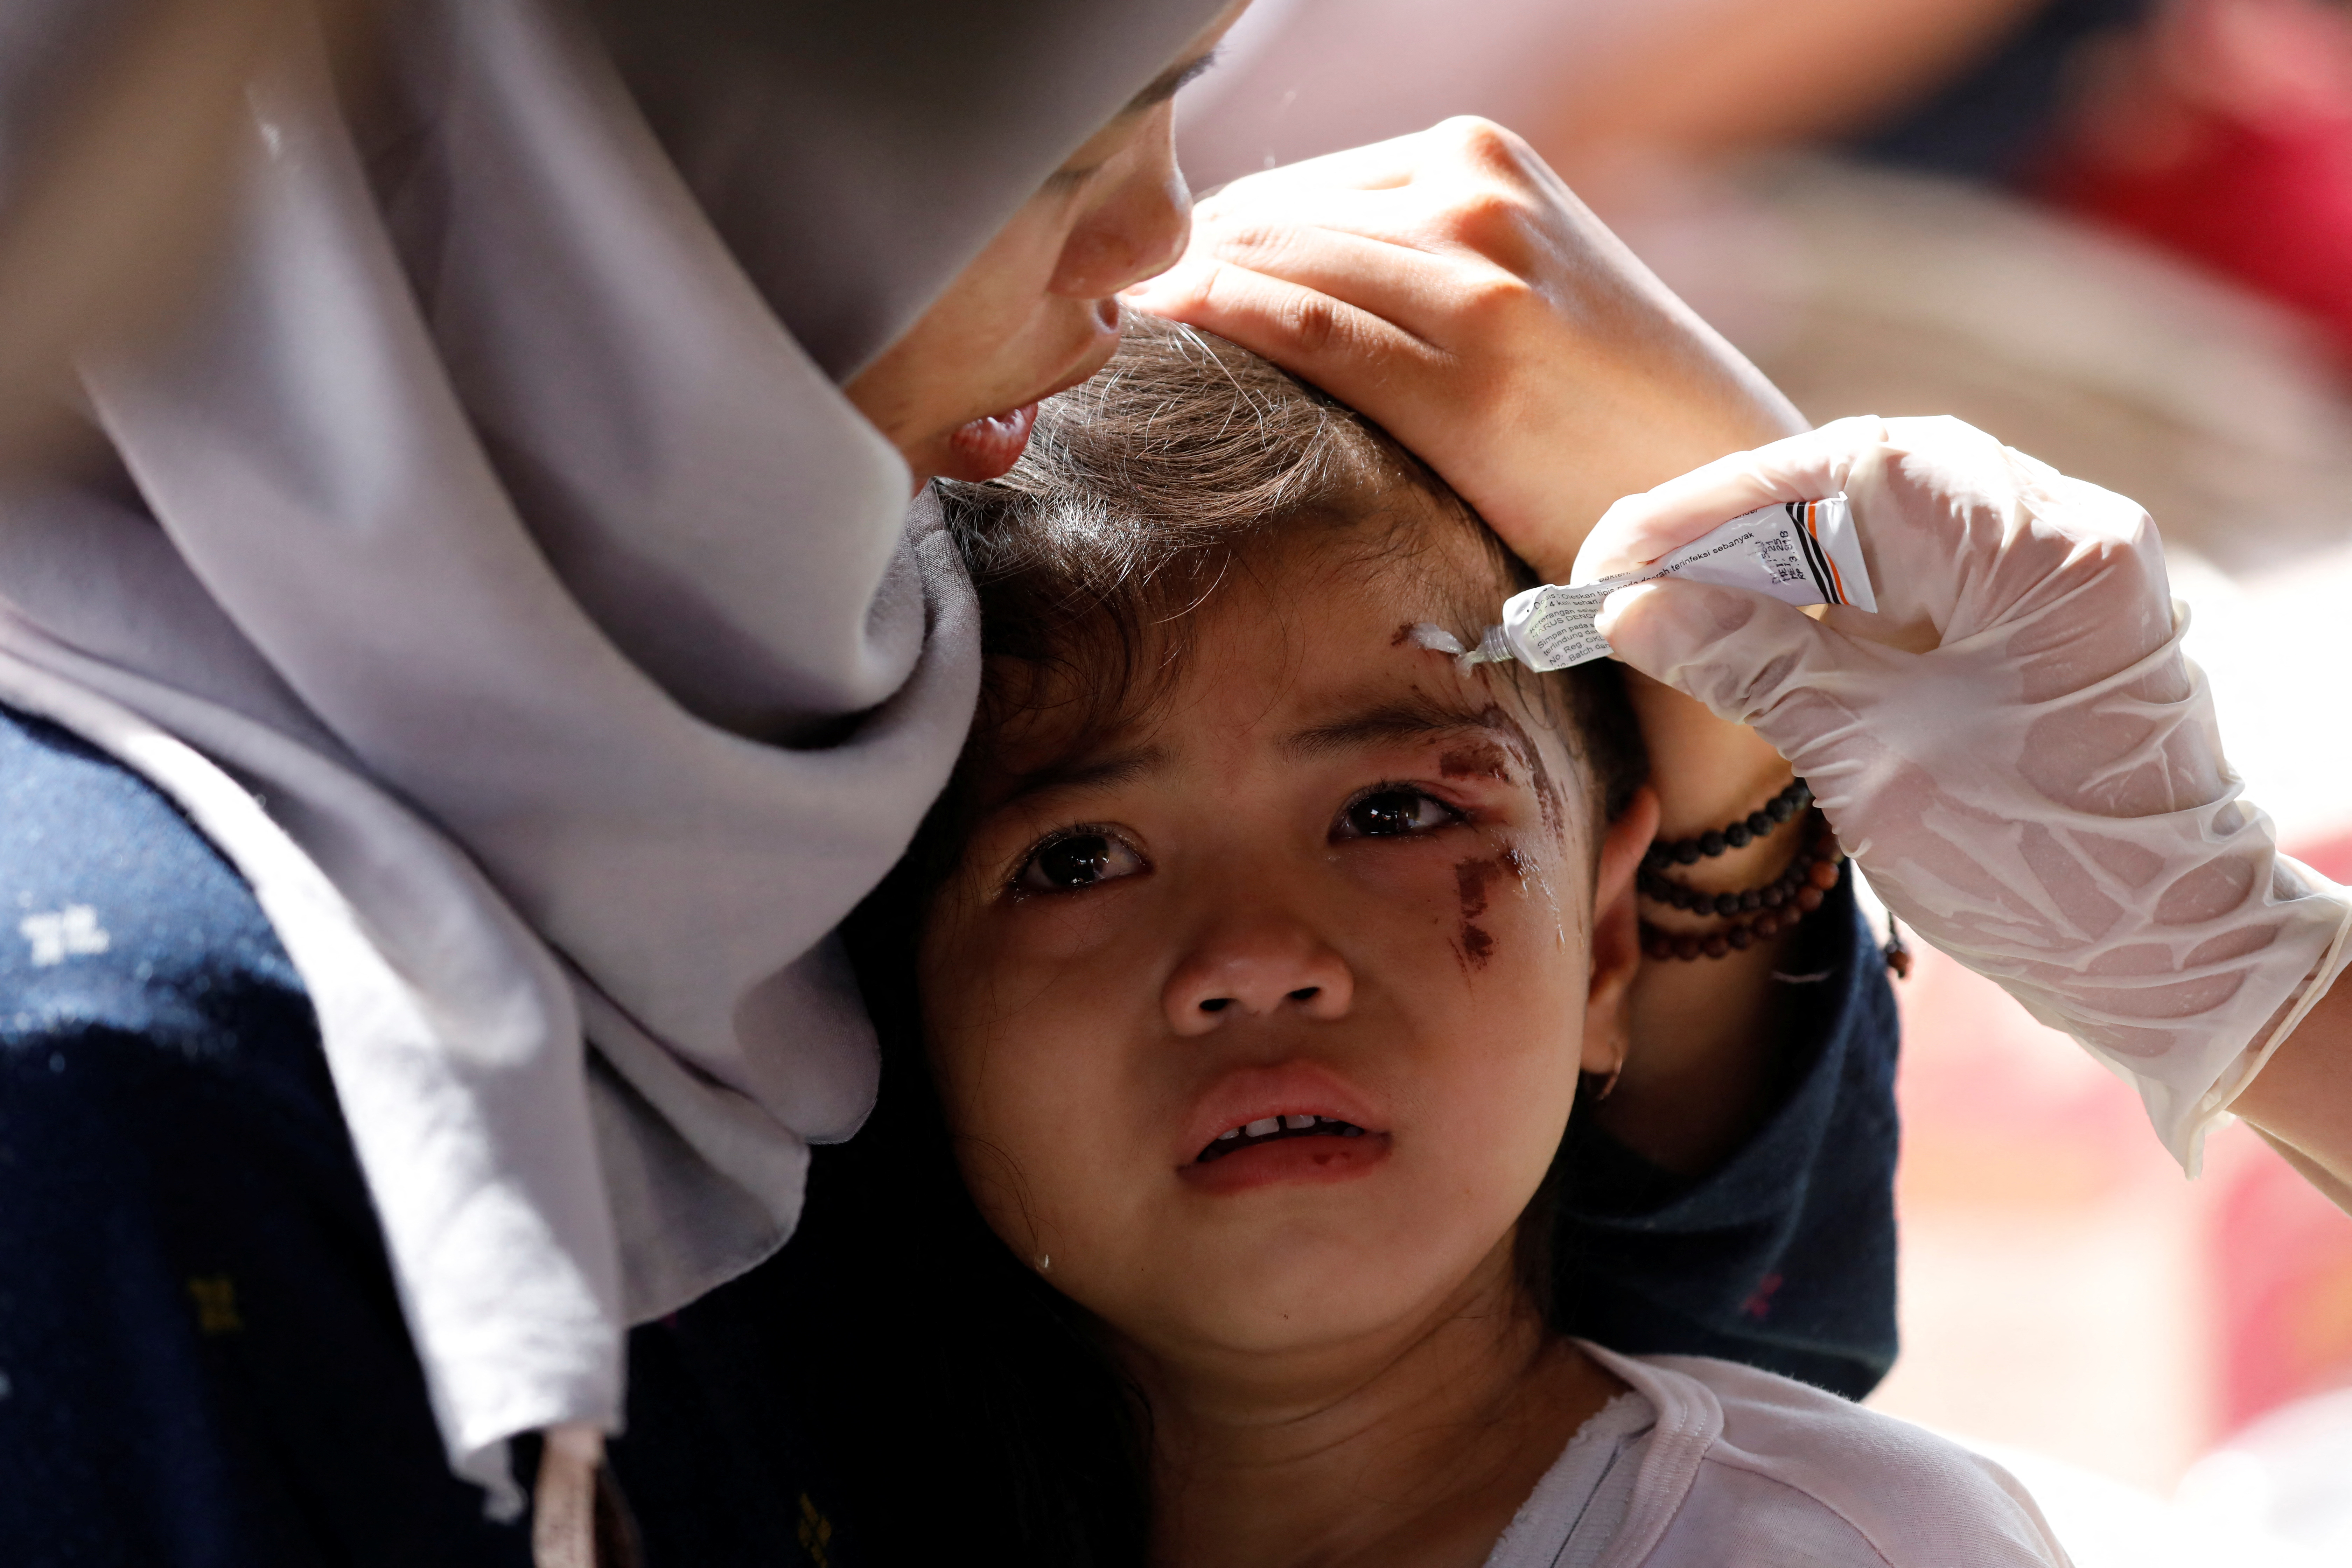 A third of the victims are children since the earthquake occurred during school hours (REUTERS)